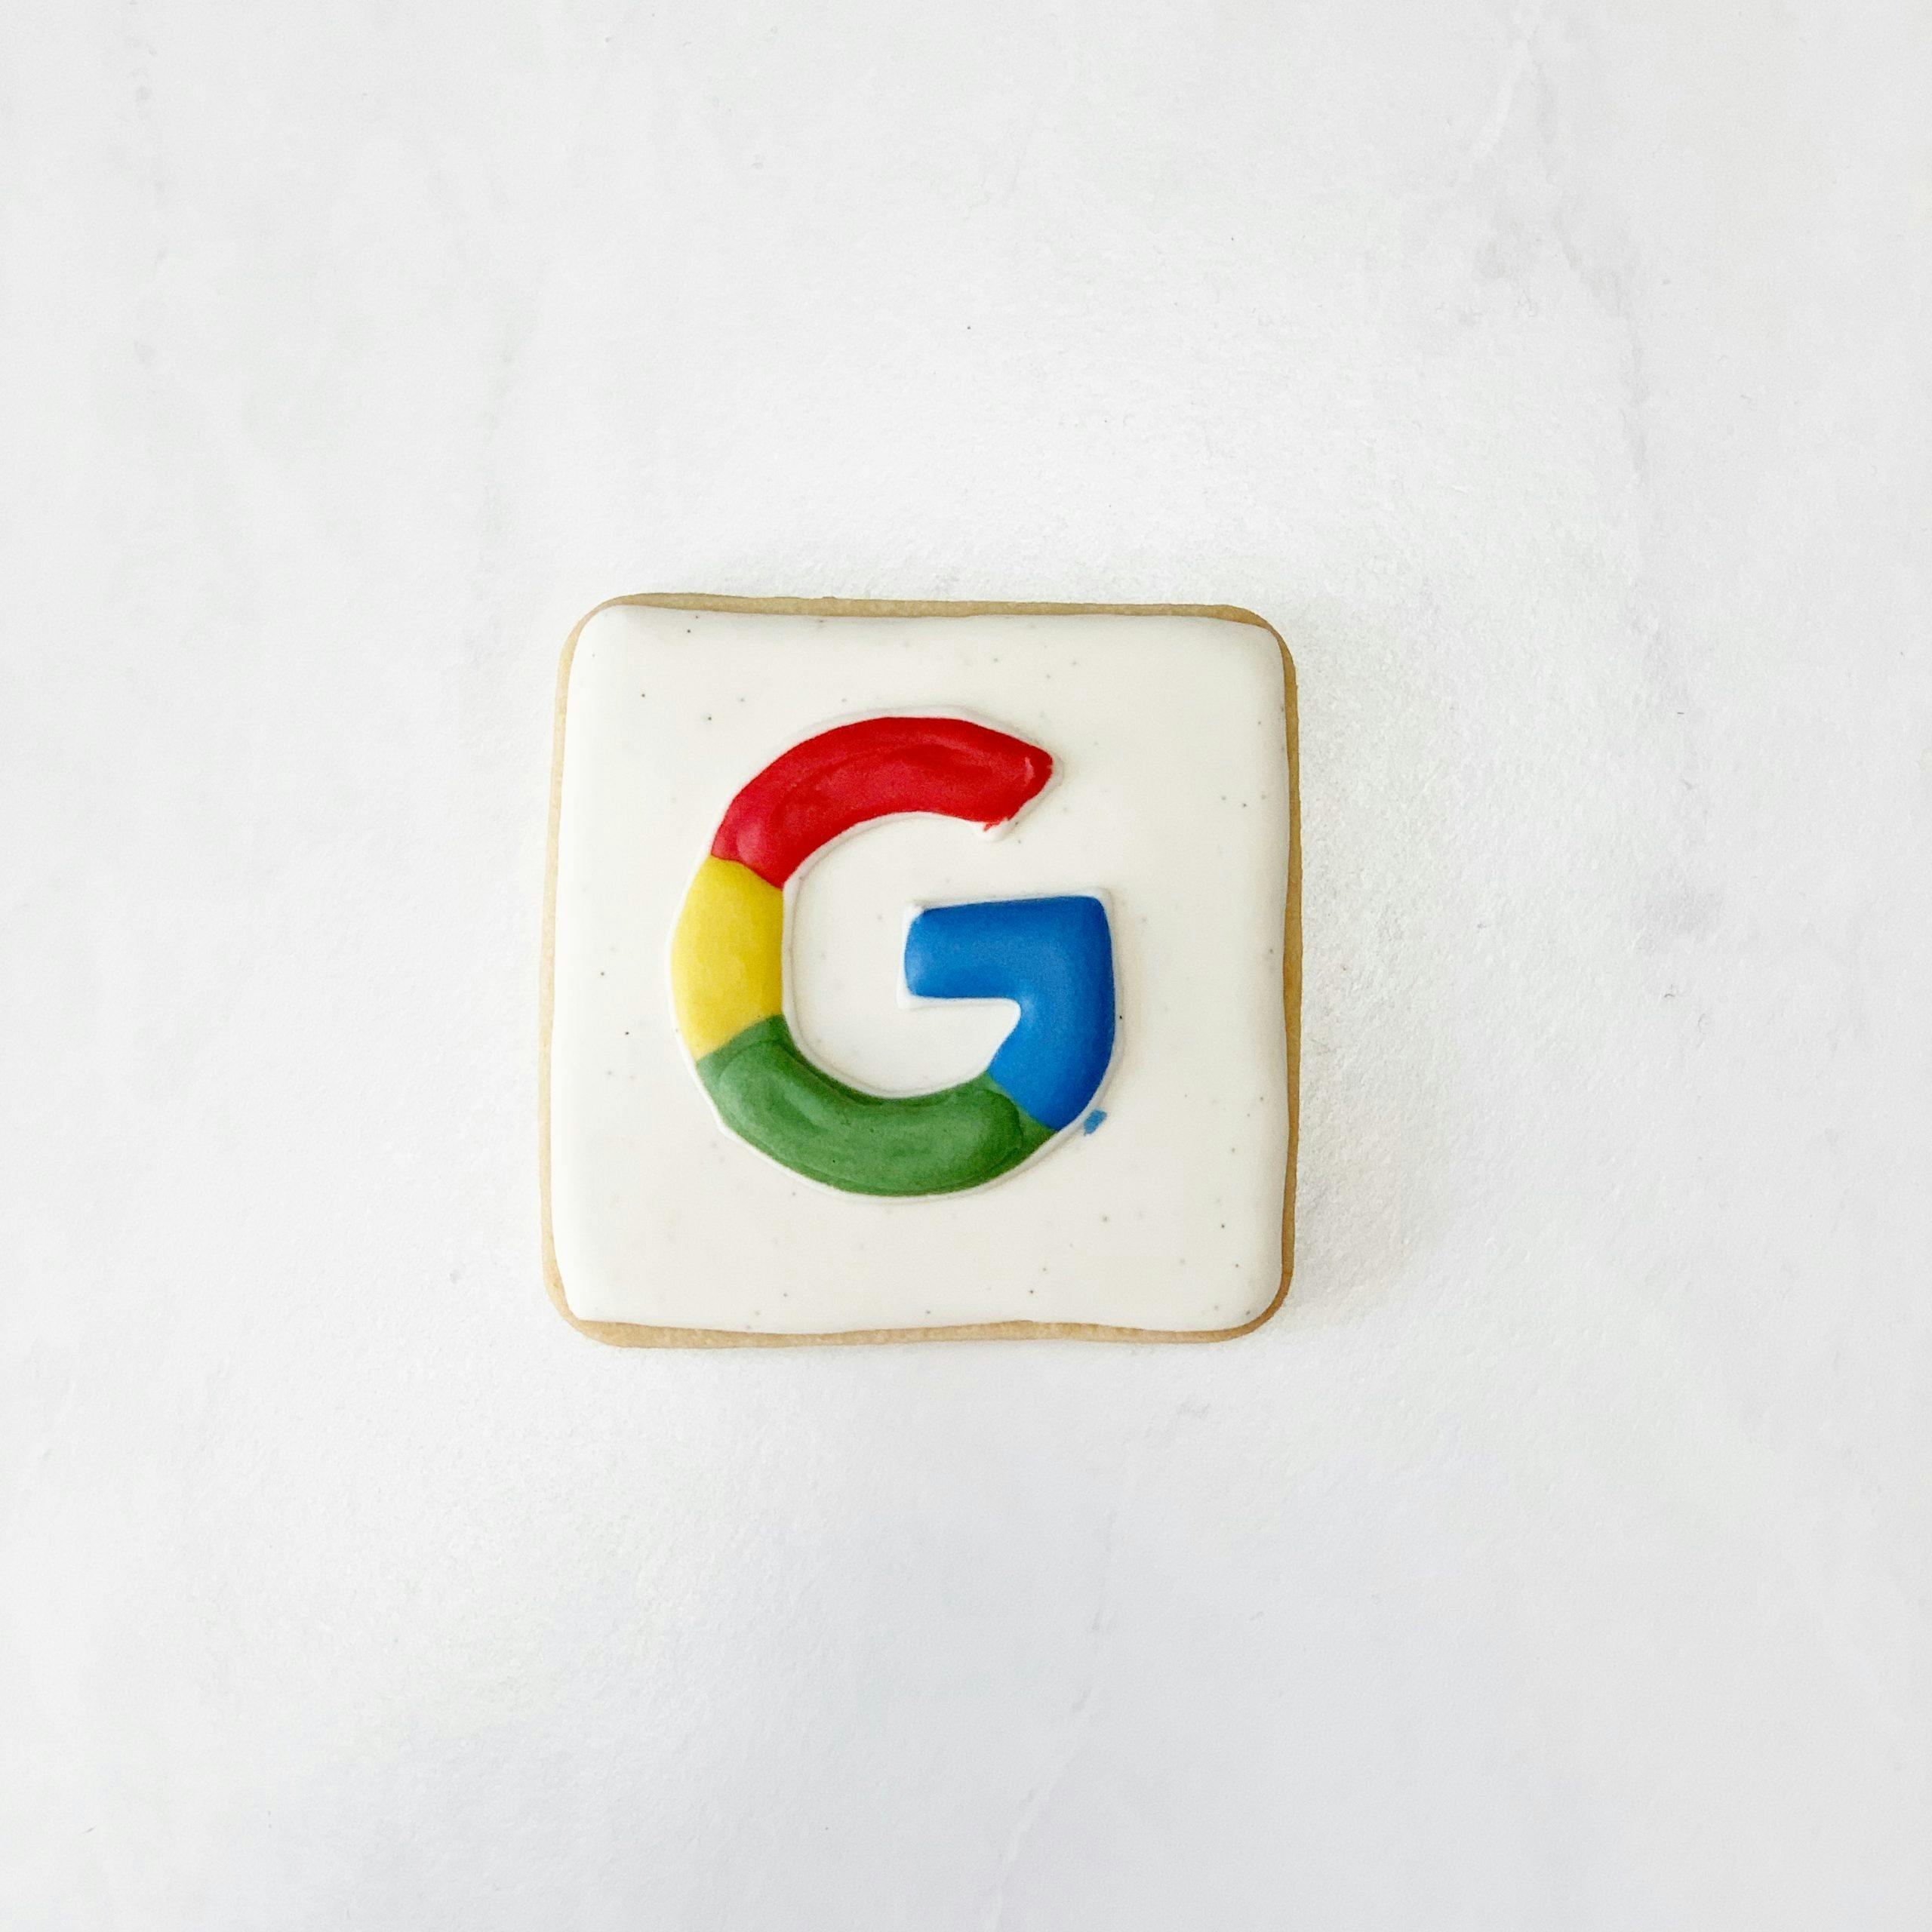 The Google logo made out of play dough.